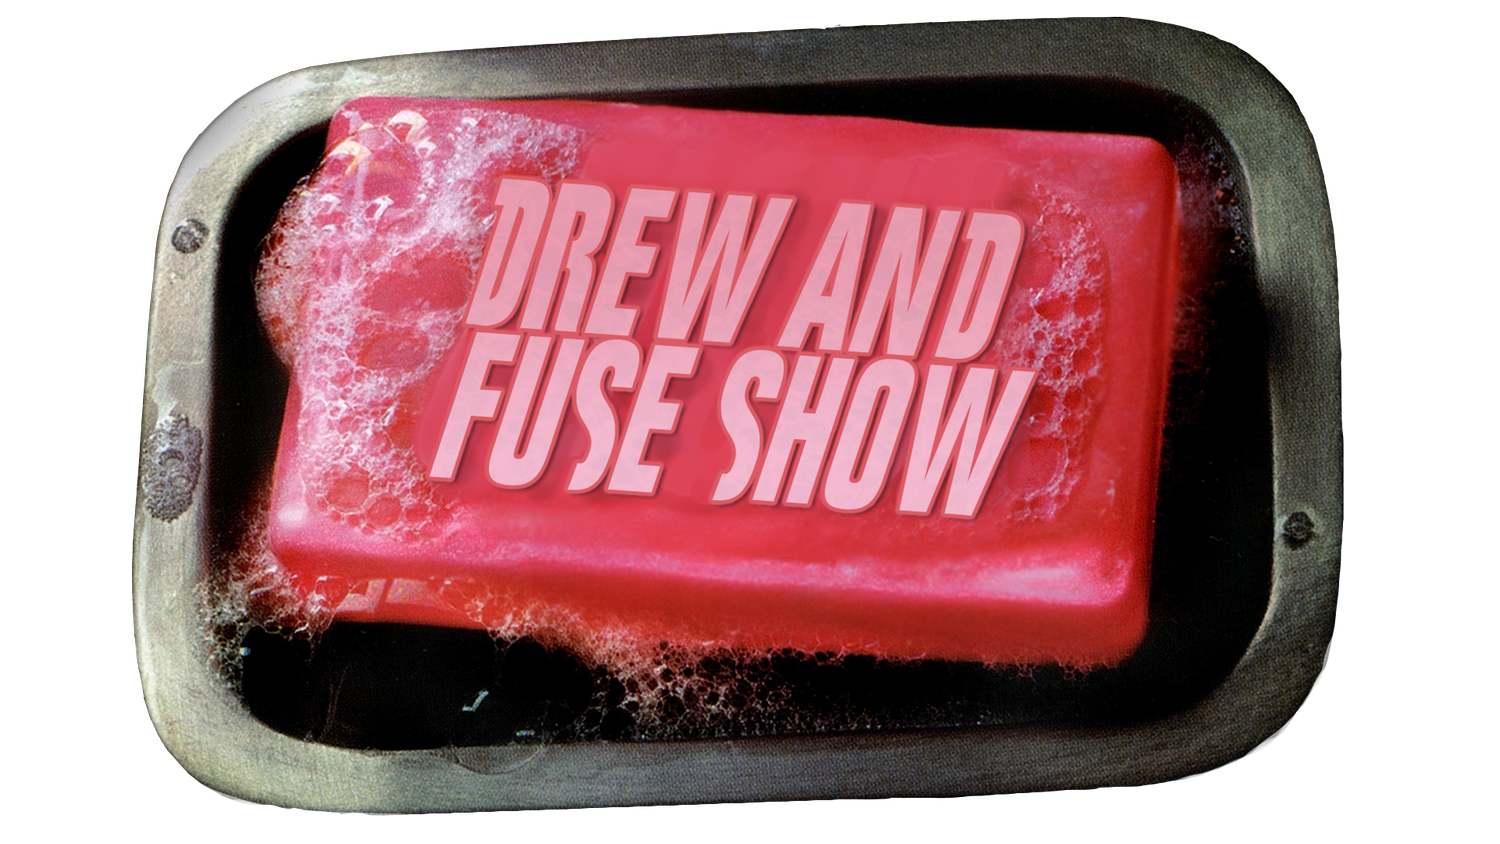 Drew And Fuse Show 